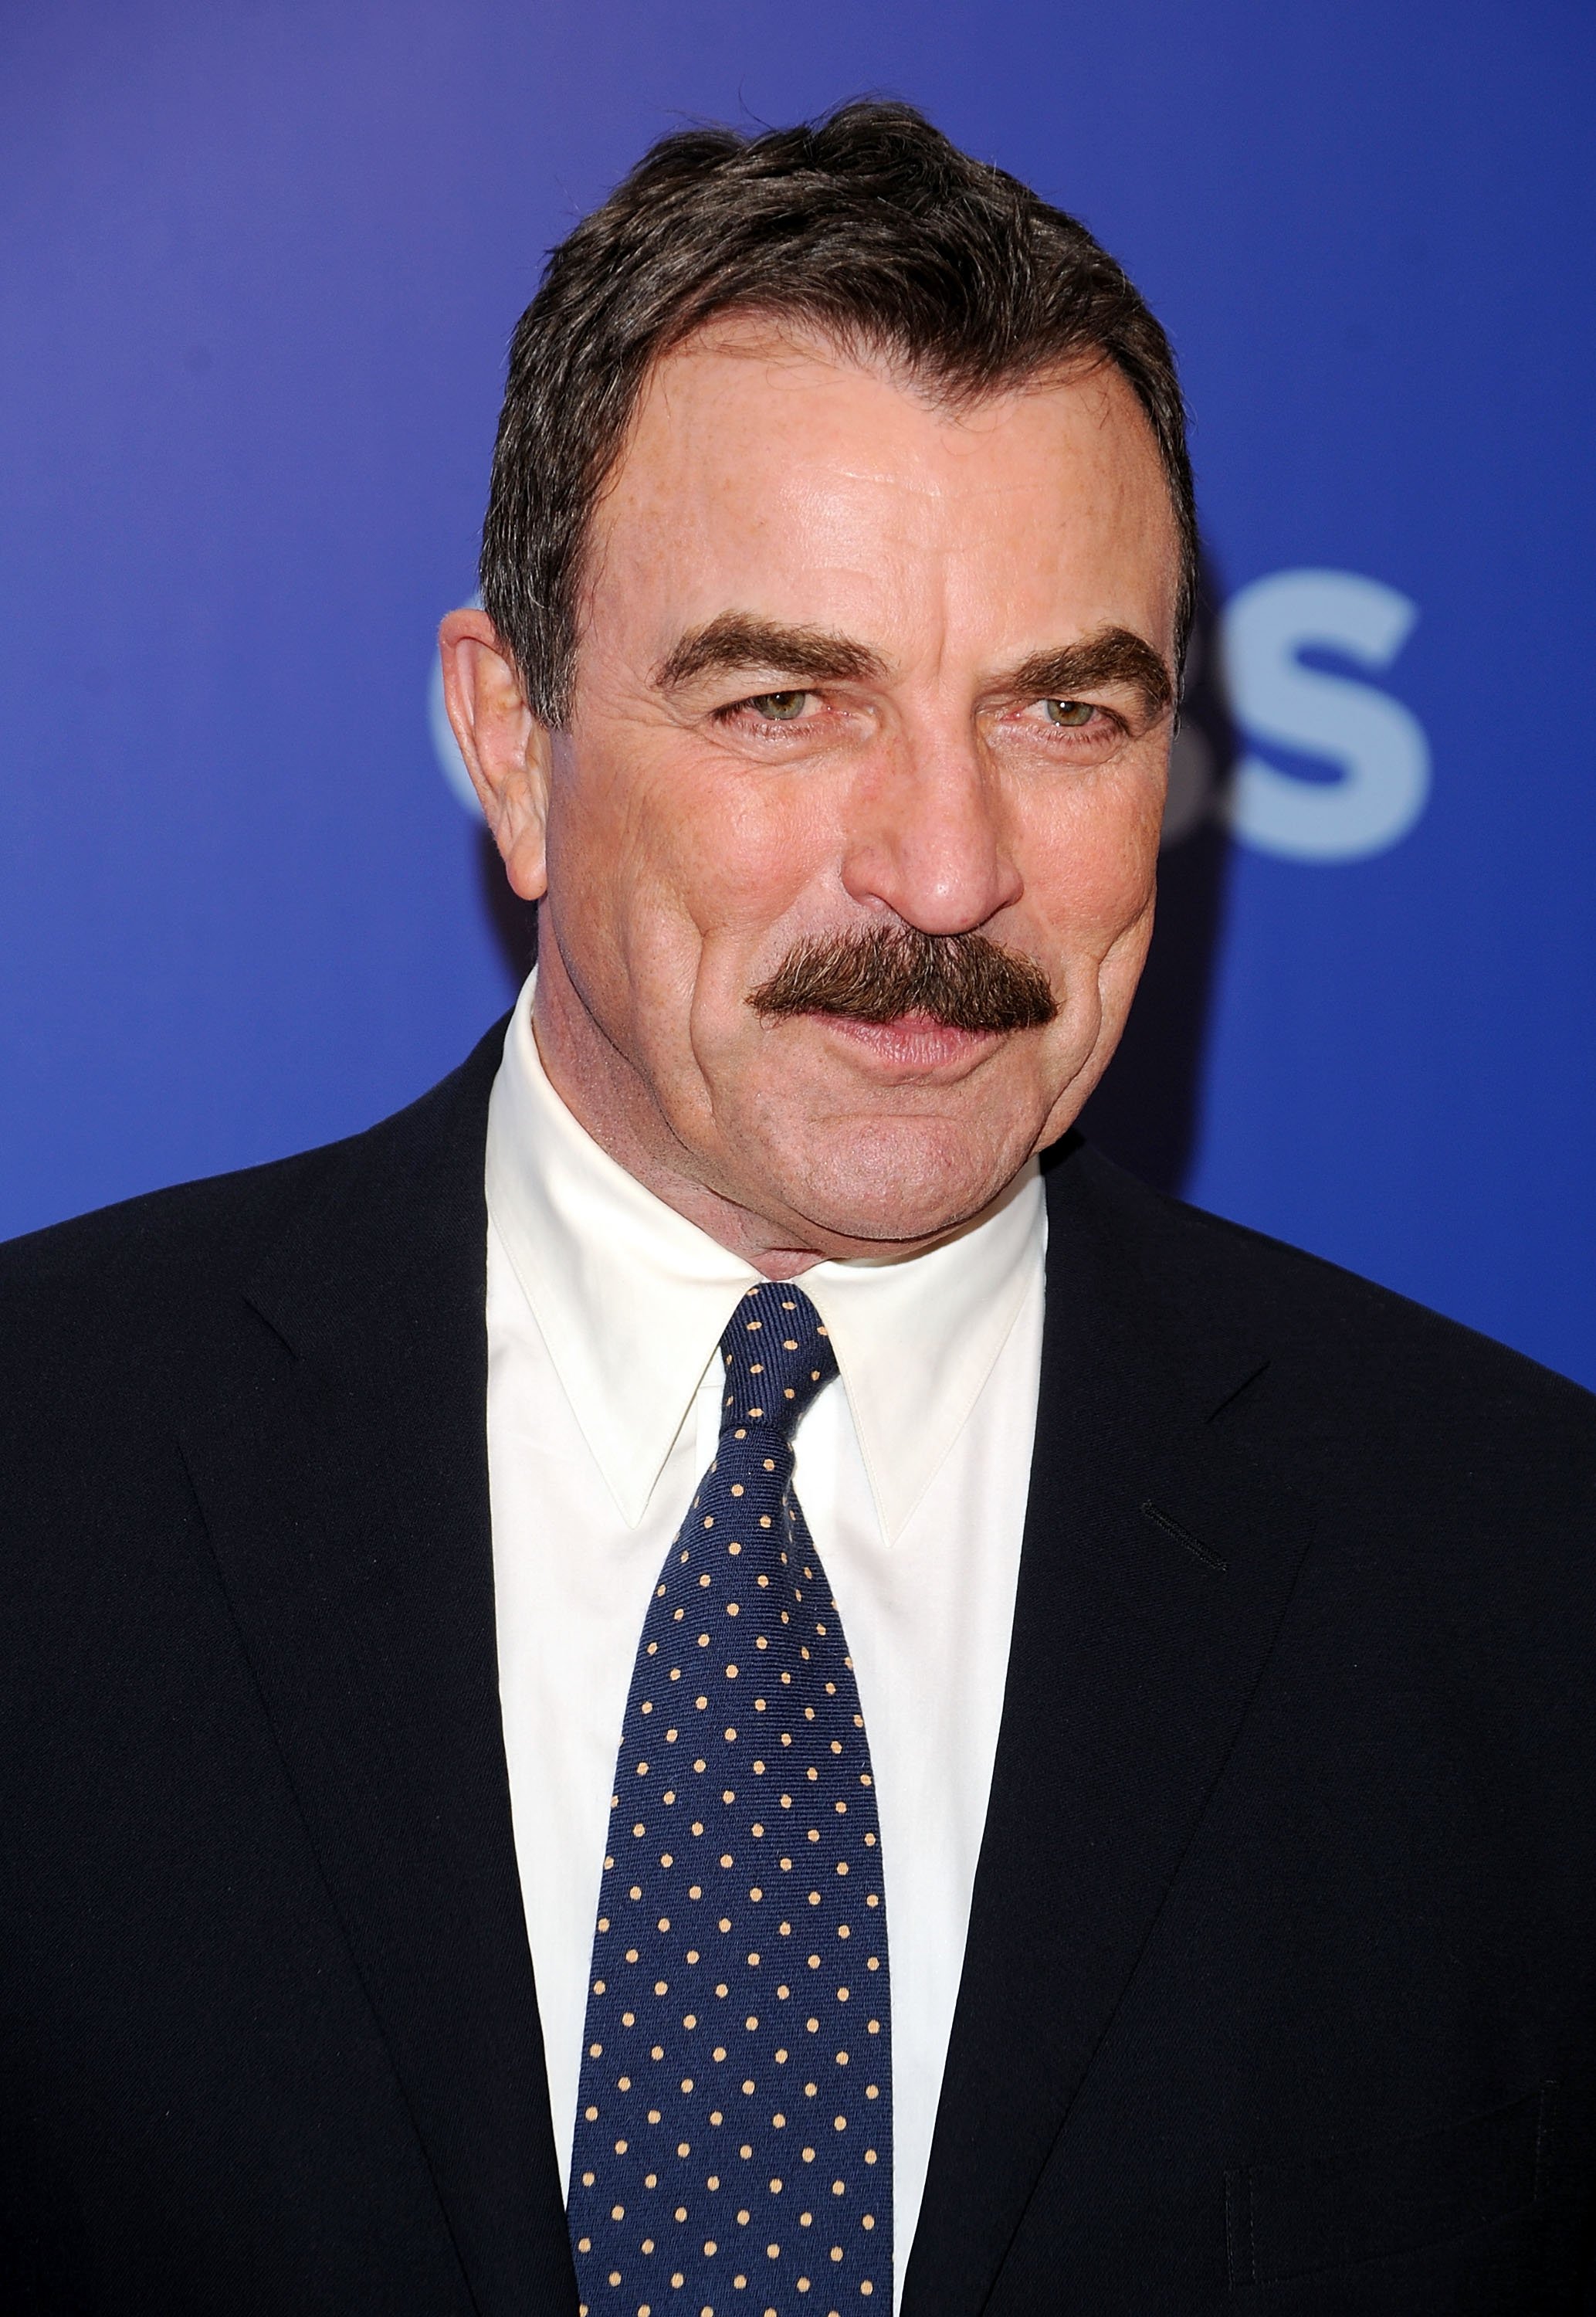 Tom Selleck attends the 2010 CBS UpFront in New York City on May 19, 2010 | Photo: Getty Images